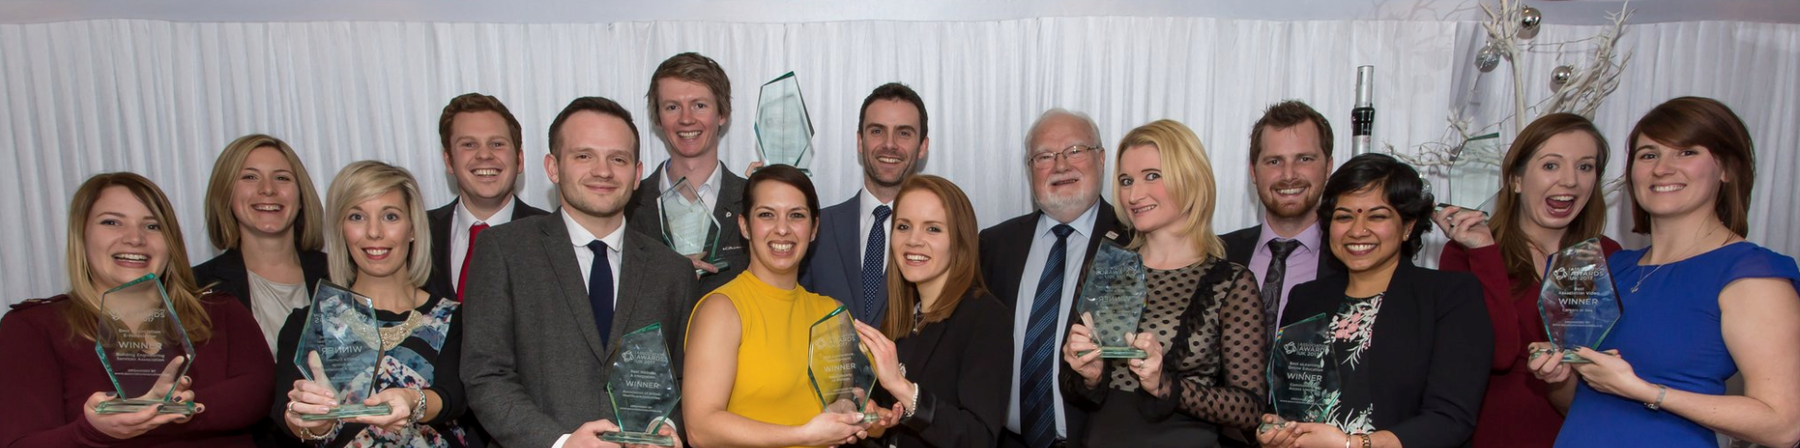 The Winners of the Association of Associations Awards